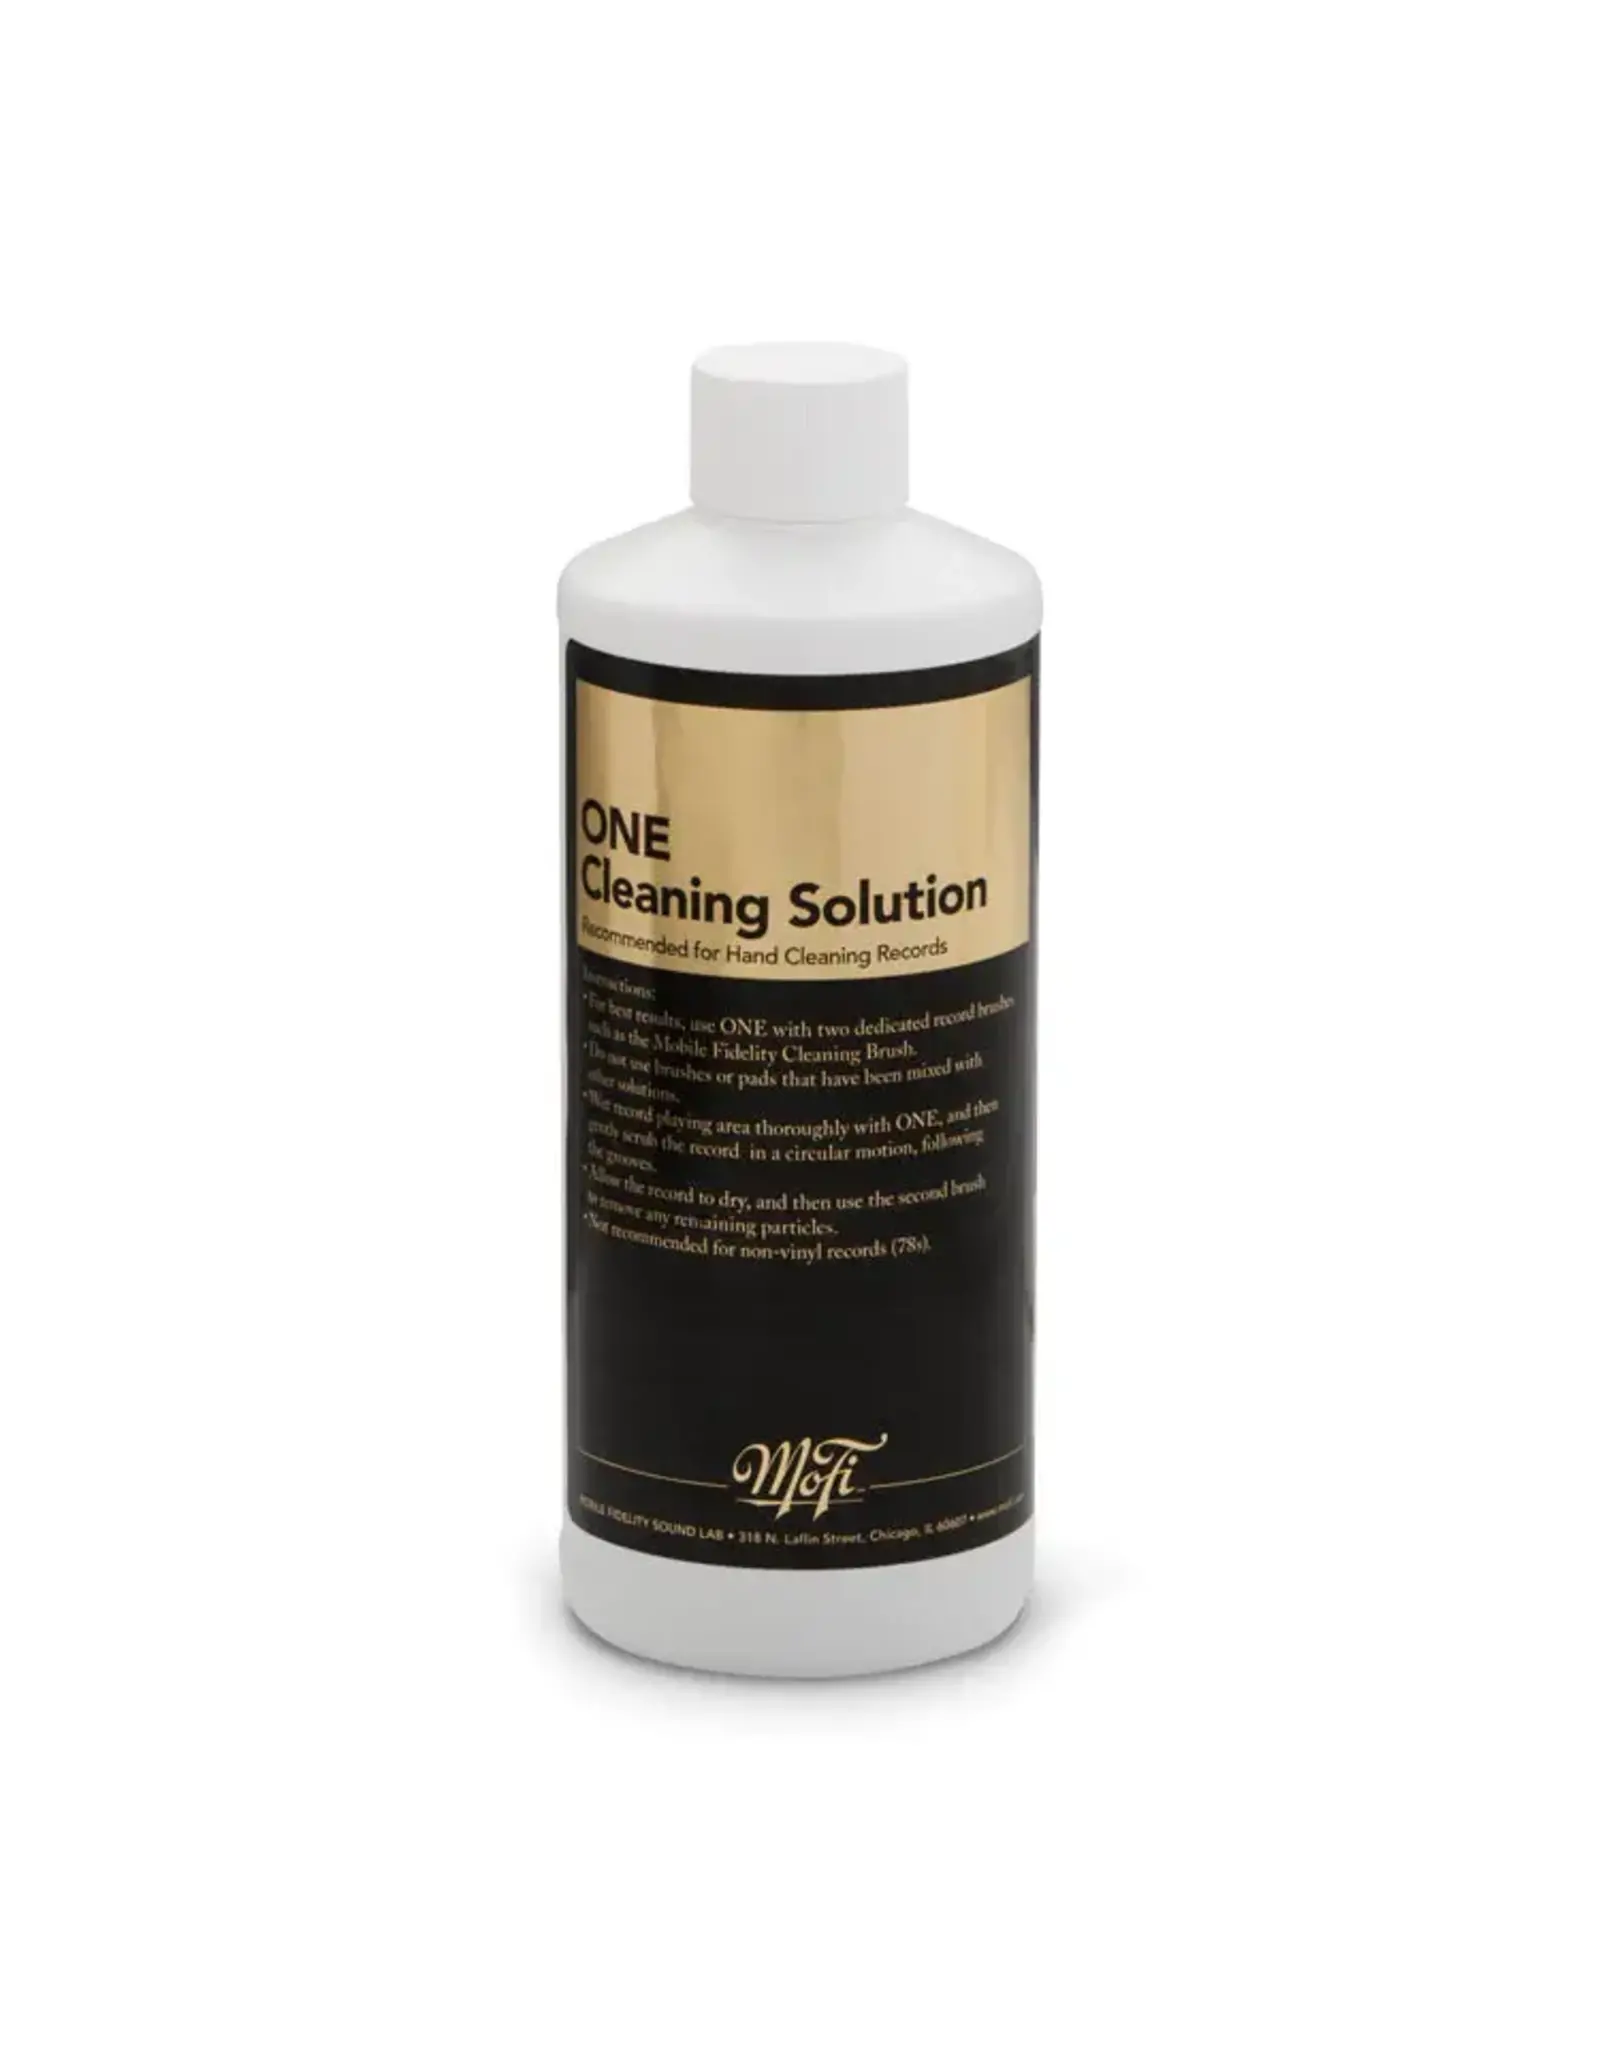 Mobile Fidelity Mobile Fidelity - One Cleaning Solution (16 oz.)